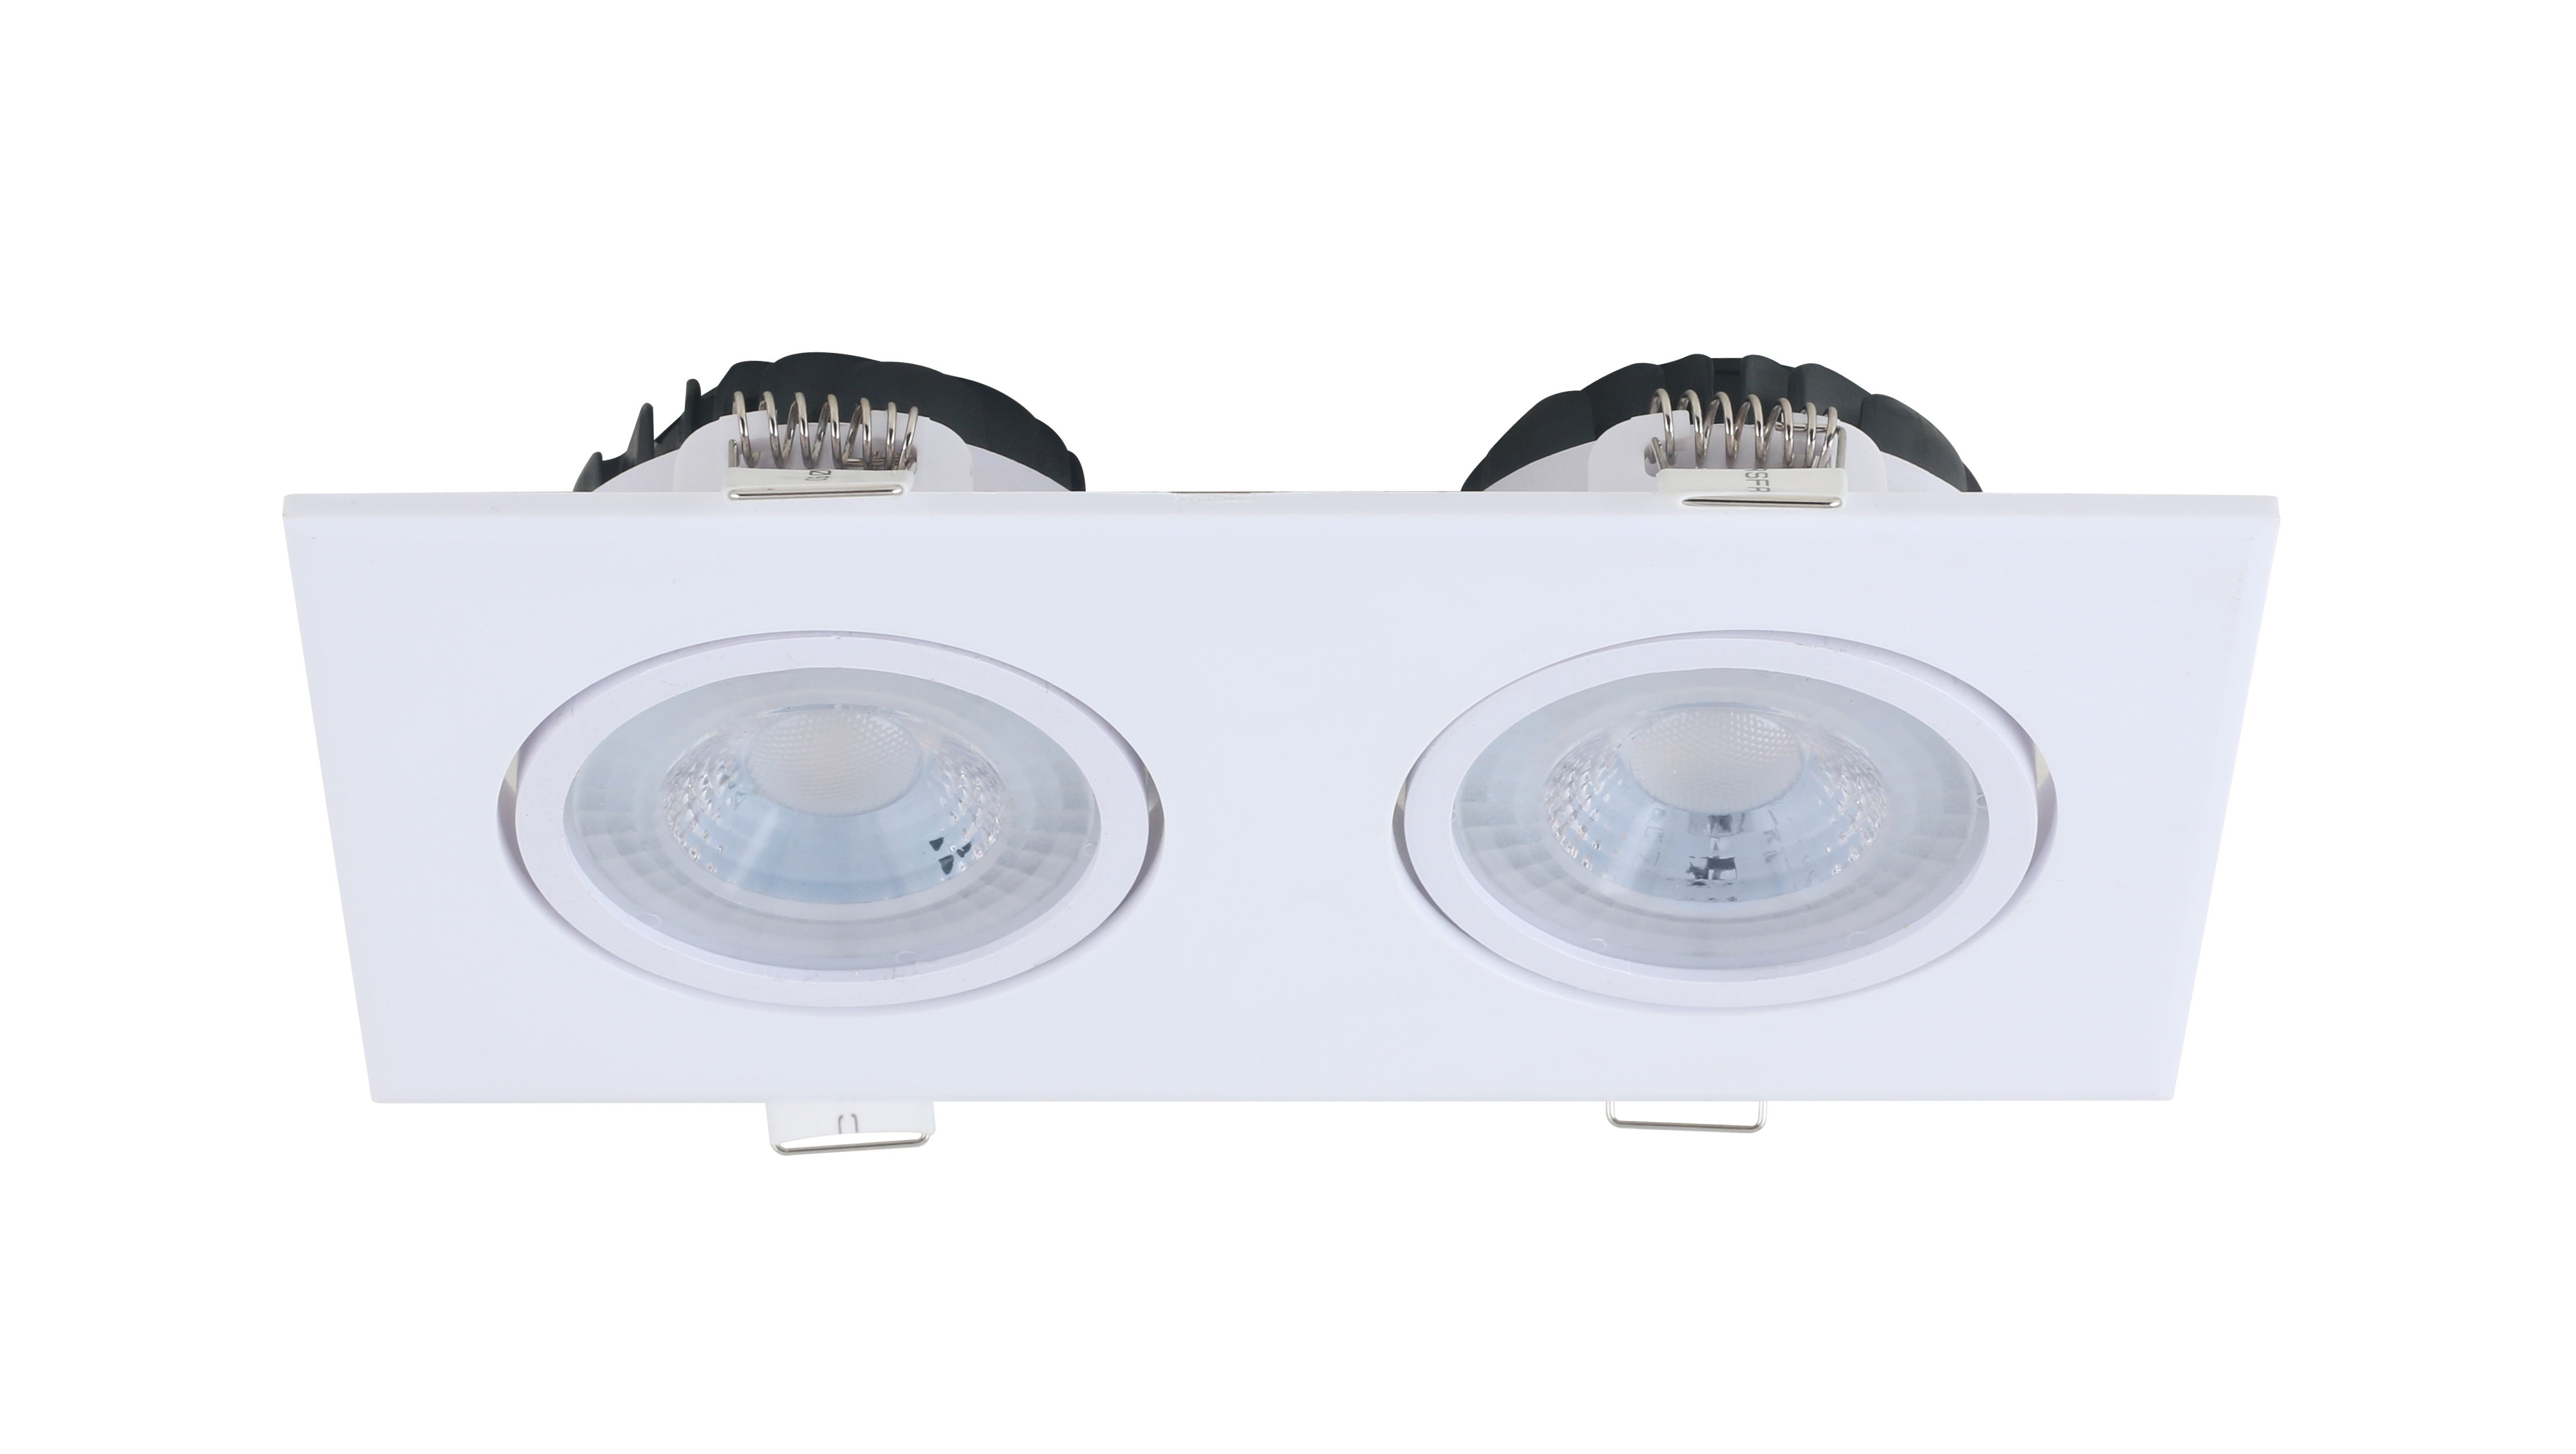 New Design Well-selling 5W 10W 15W Plastic SMD LED Ceiling Light